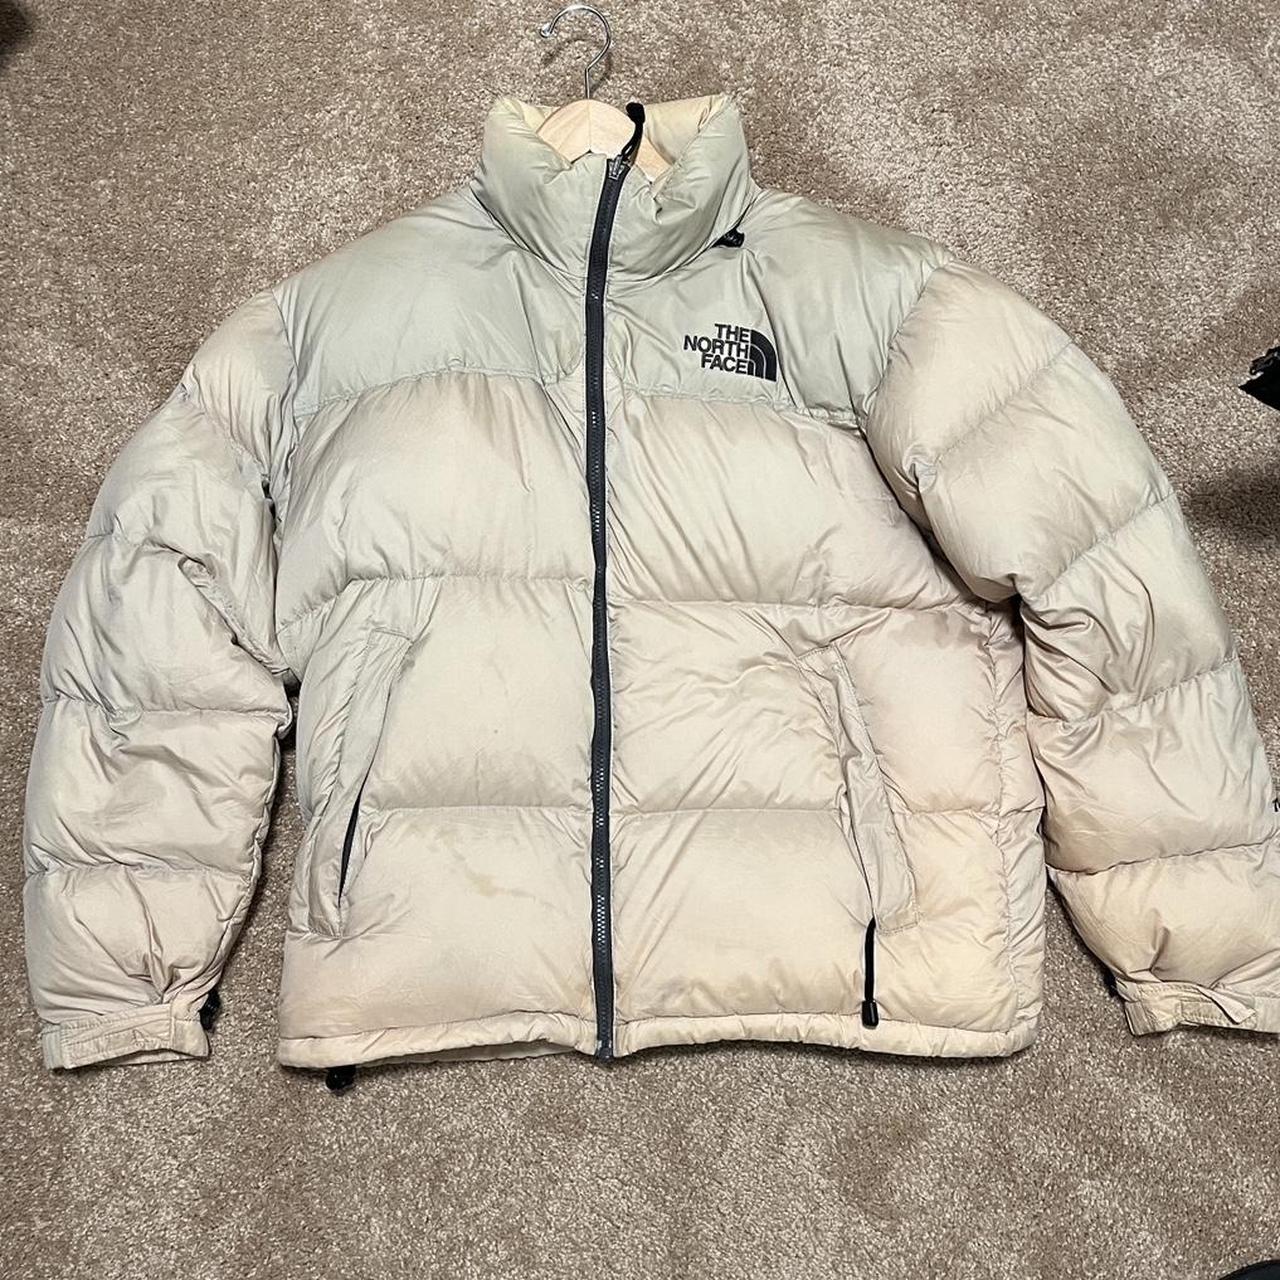 THE NORTH FACE 700 PUFFER JACKET. Prices... - Depop